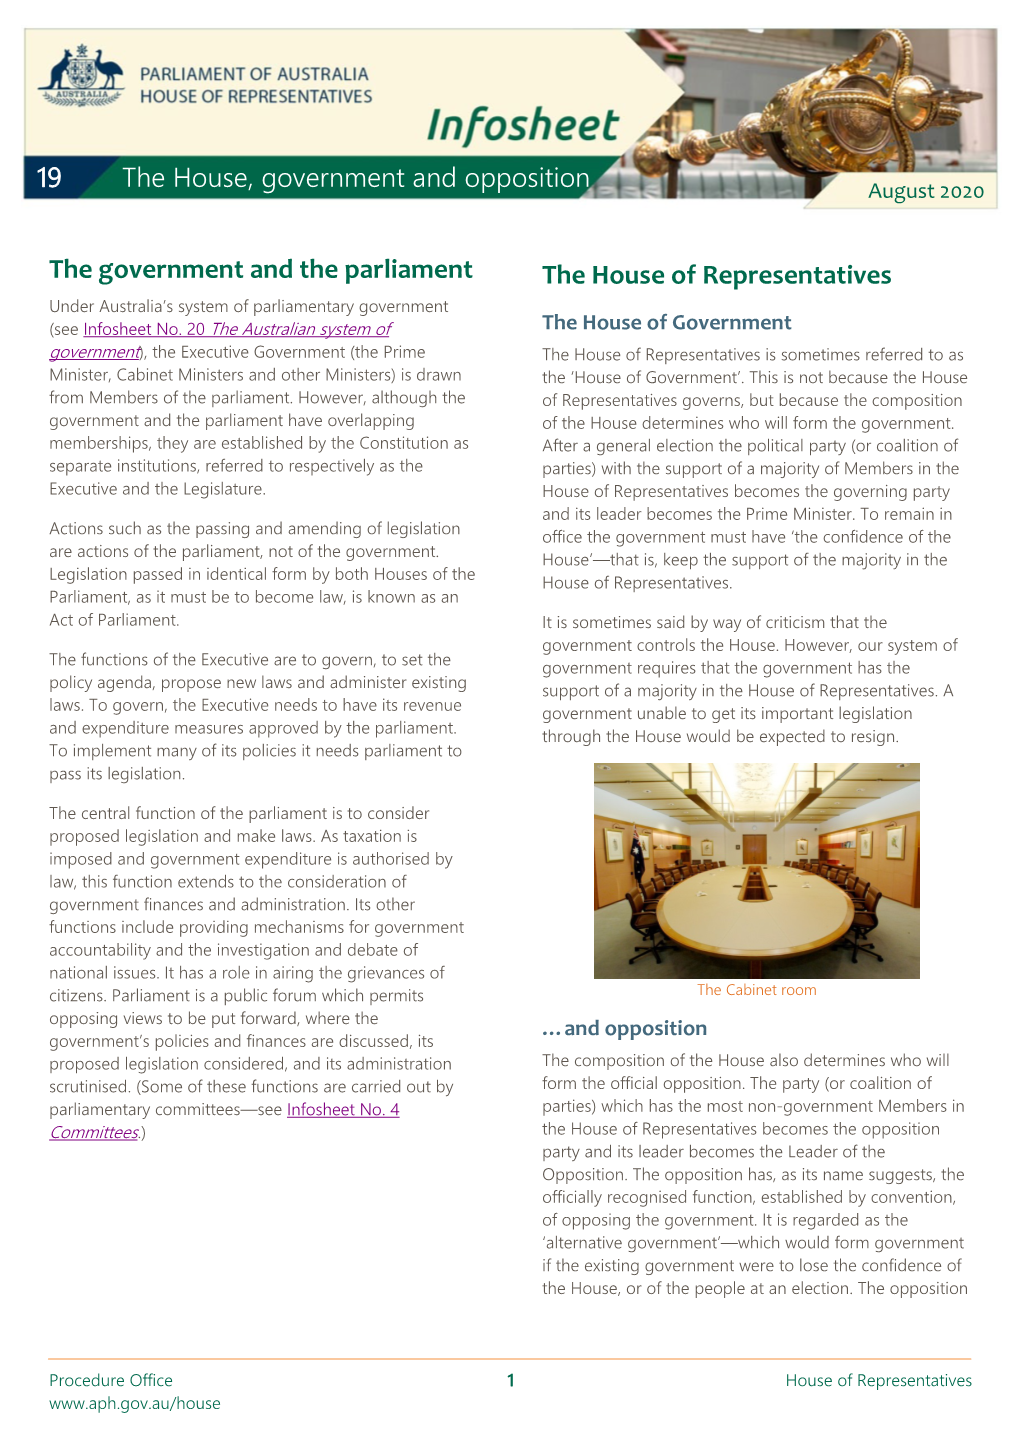 Infosheet No. 19: the House, Government and Opposition